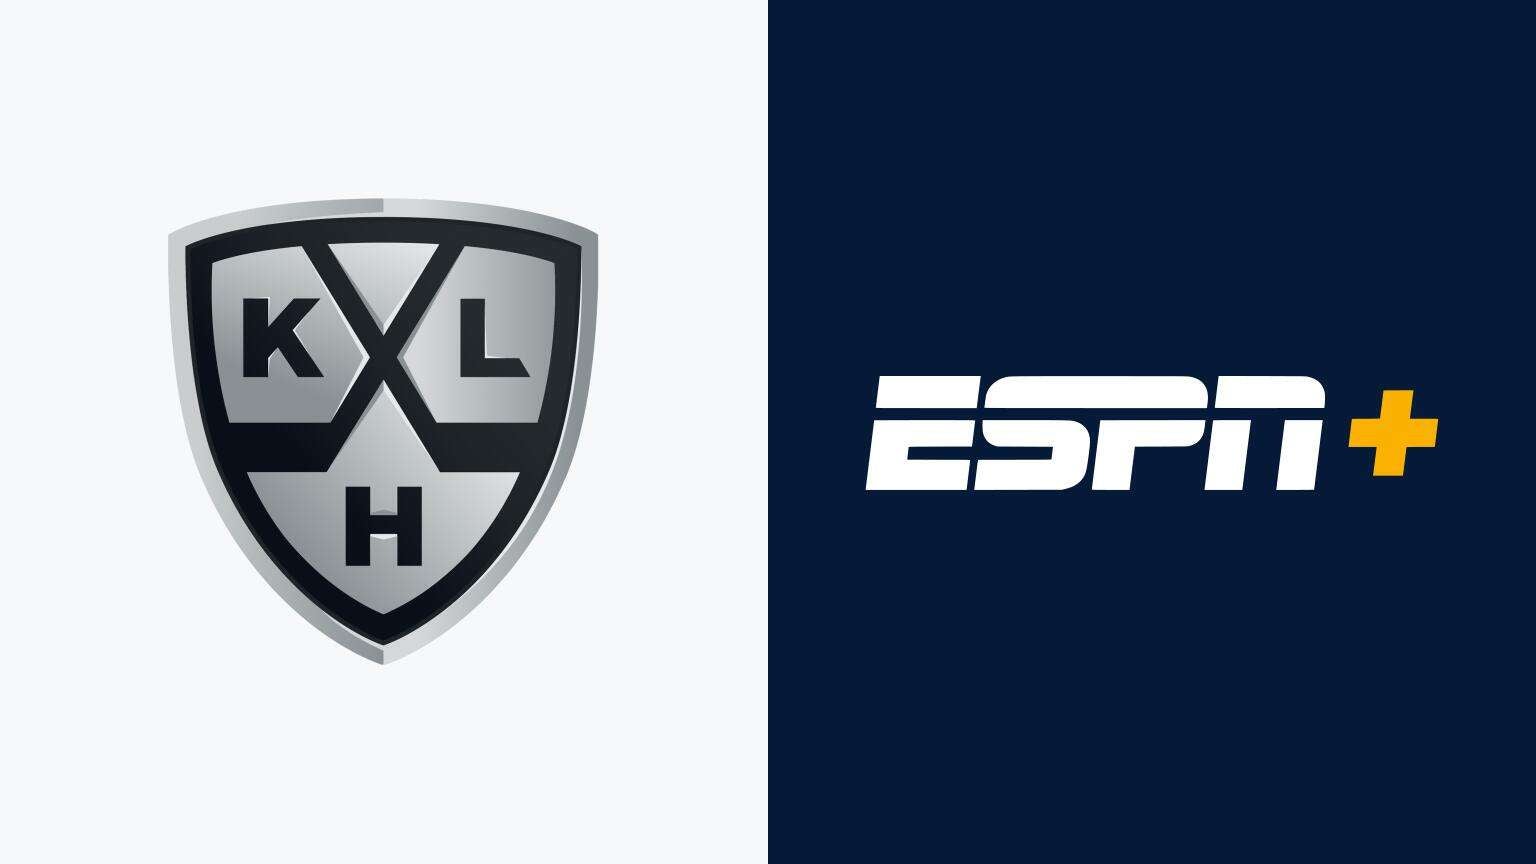 Its Official KHL Games To Stream on ESPN+ Starting Friday Afternoon